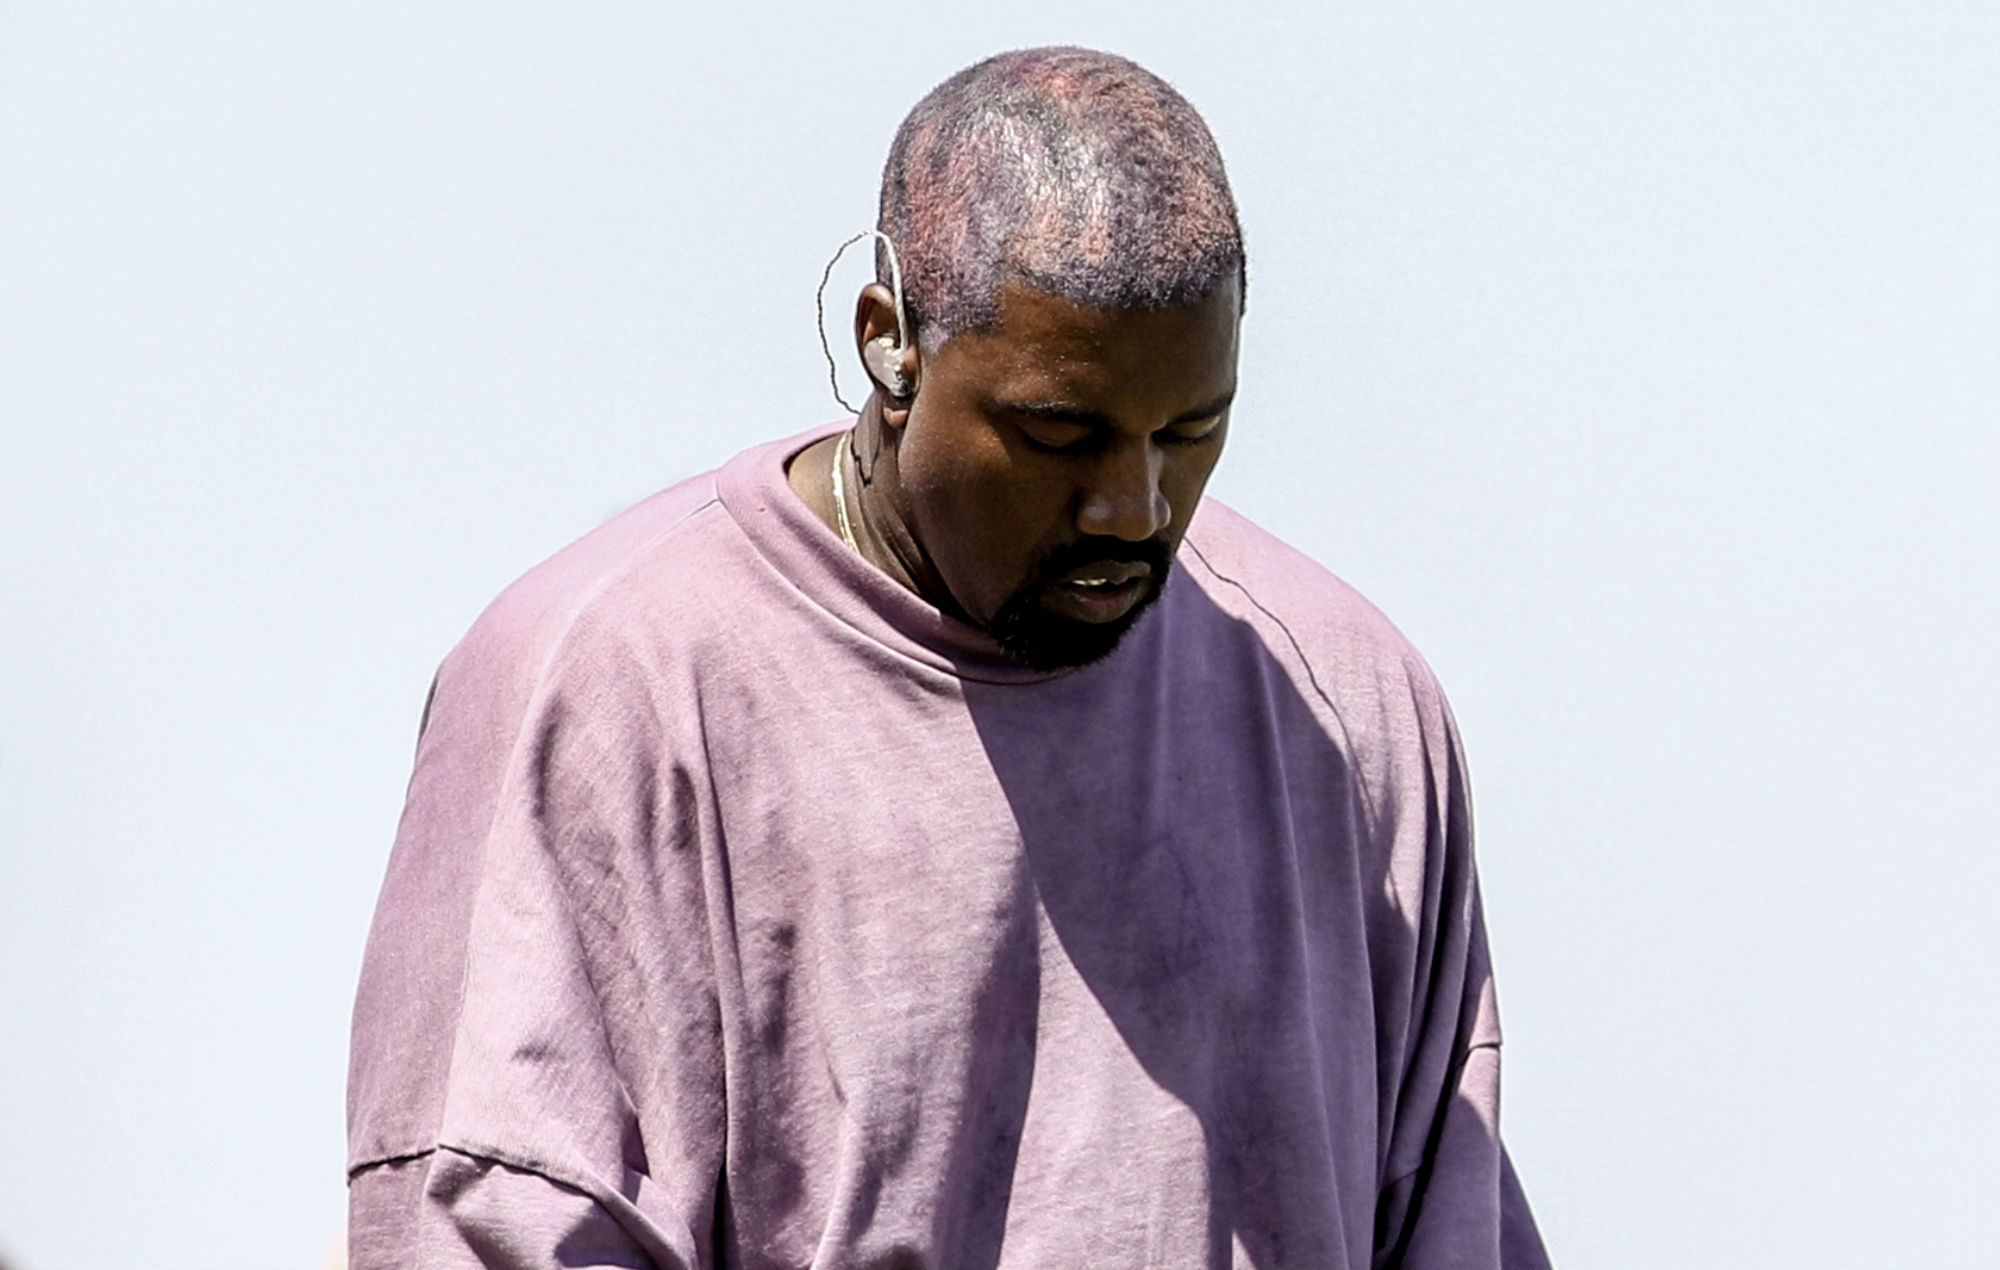 Kanye West donates $2 million, pays college tuition for George Floyd’s daughter